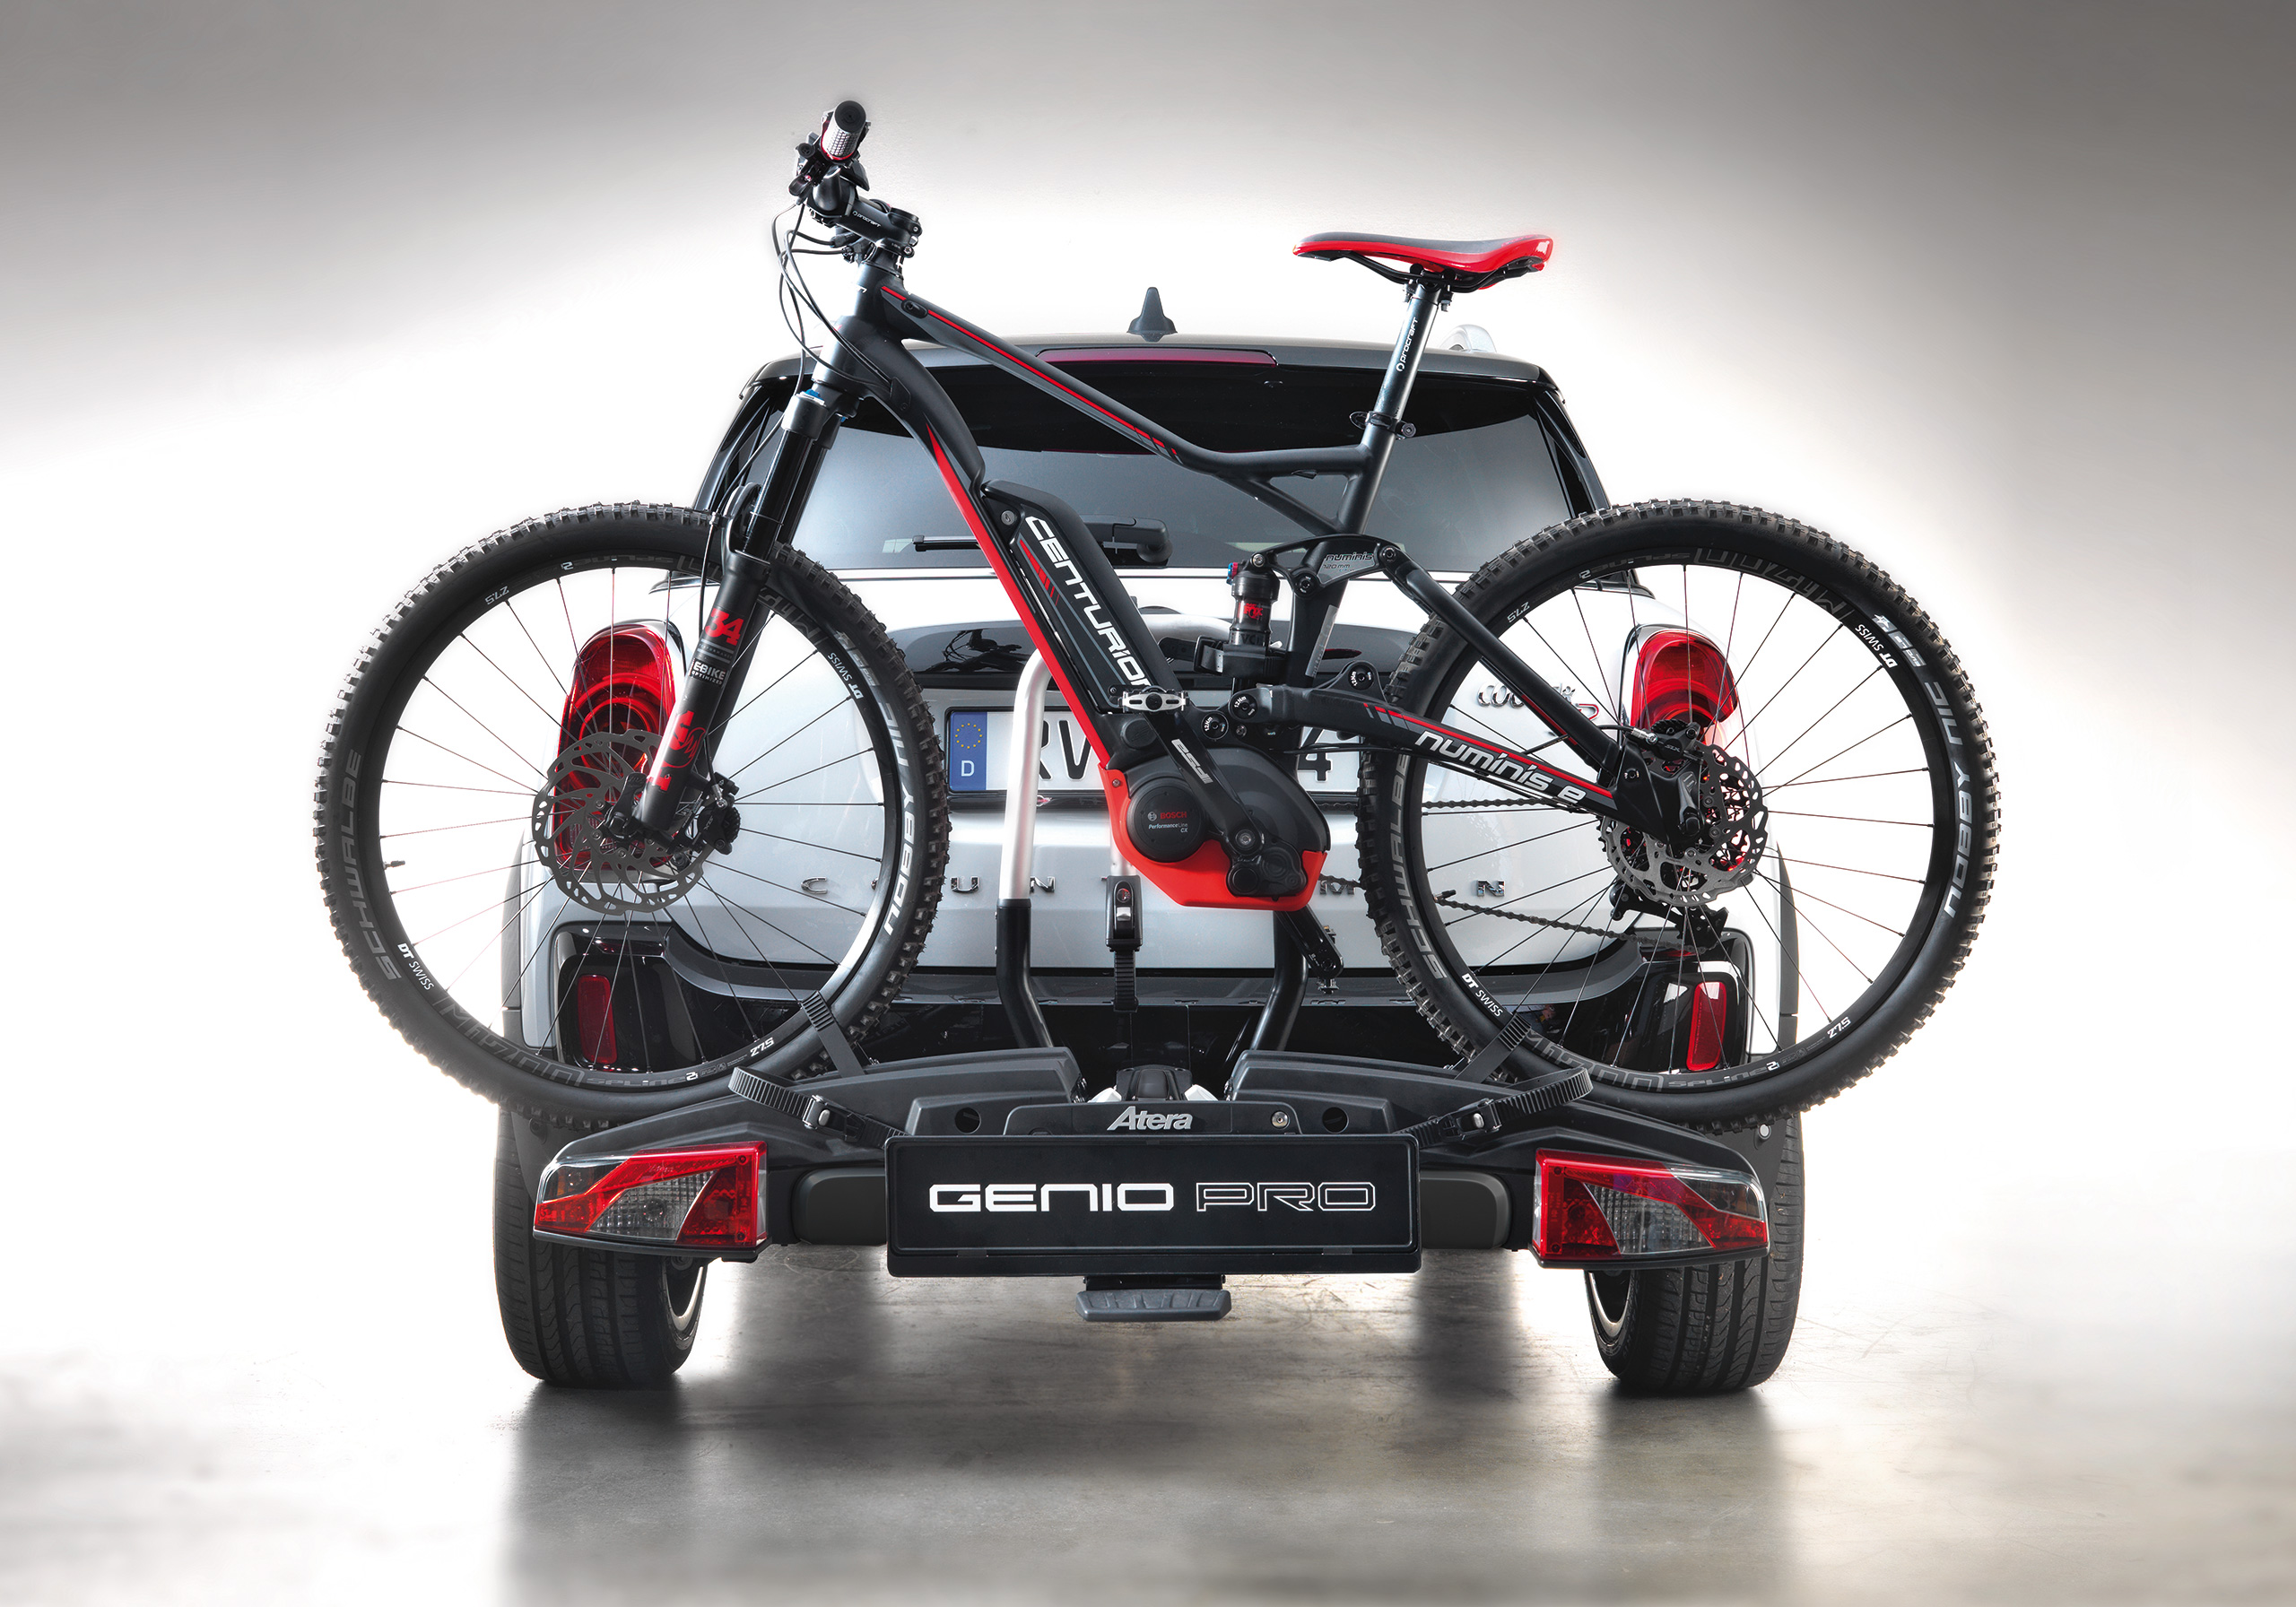 Ater GENIO PRO tow bar bike carrier